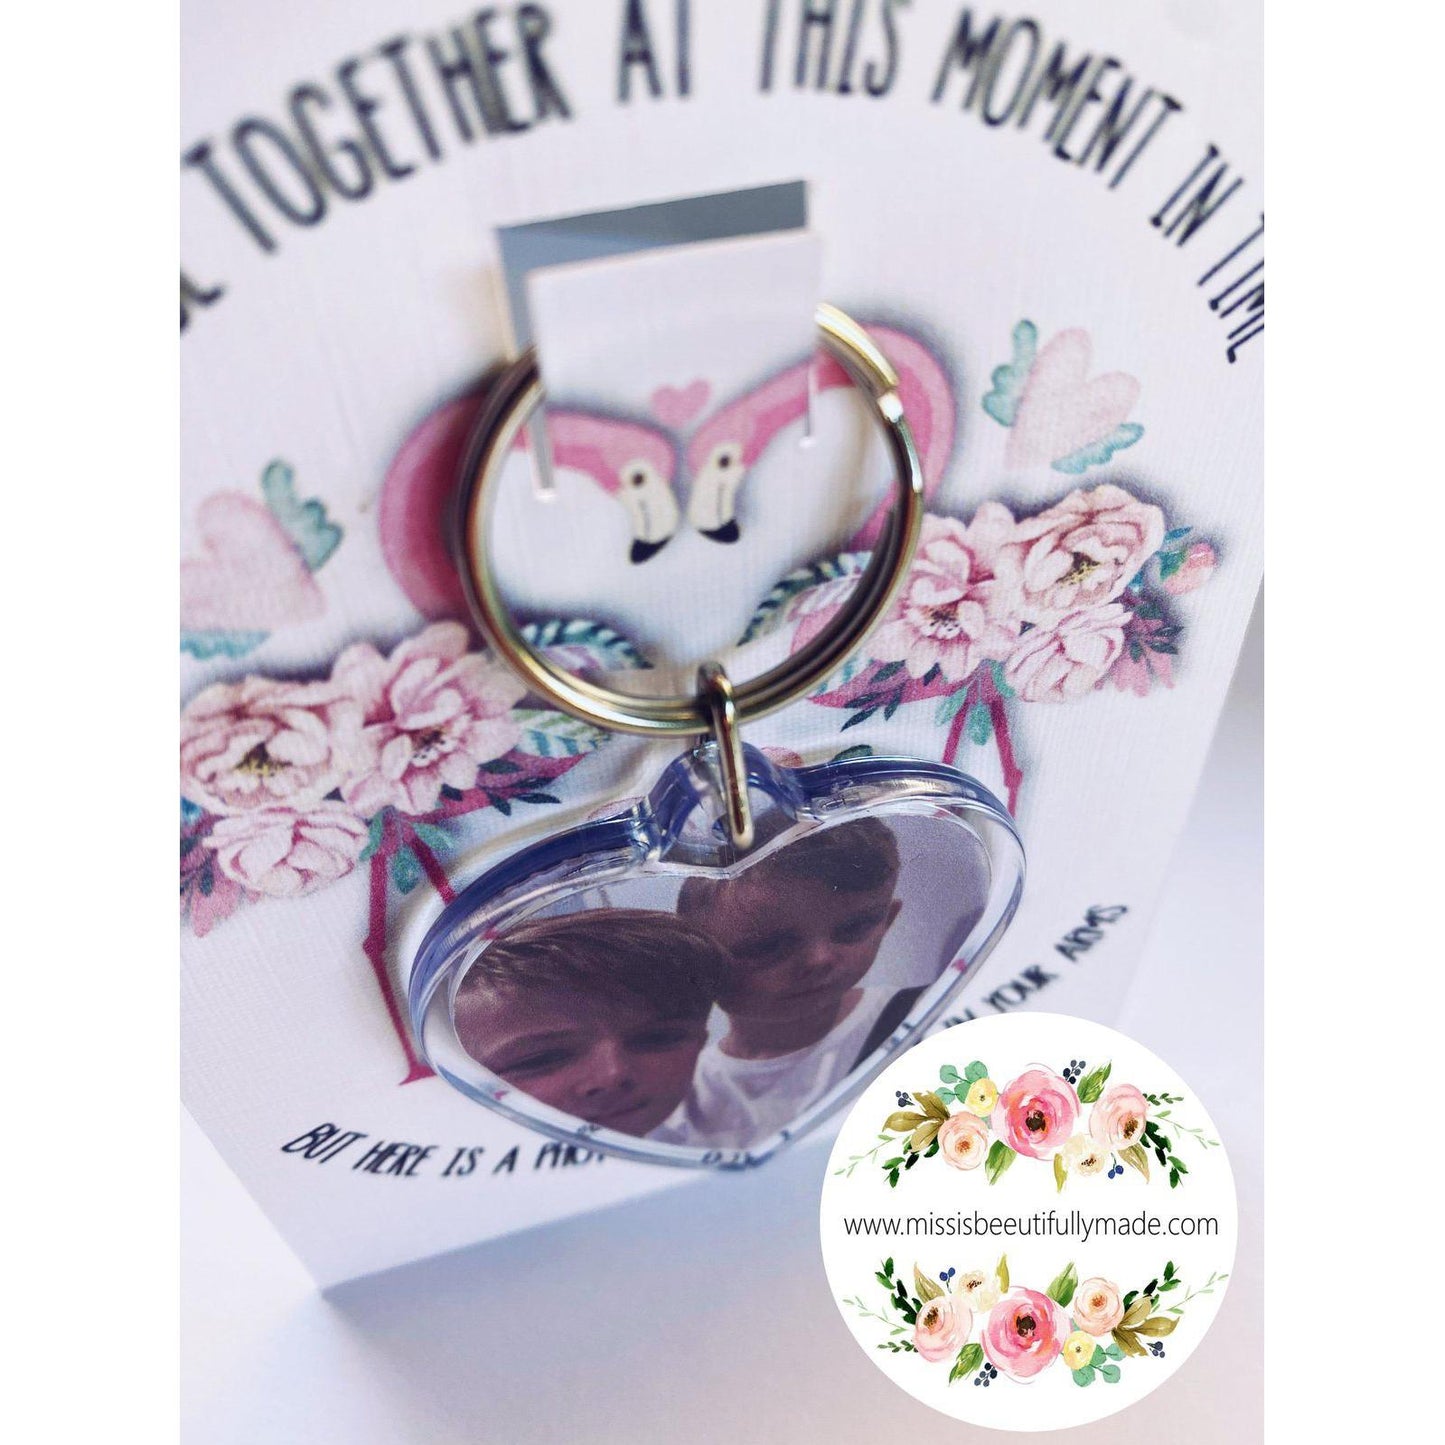 Key ring - We can’t be together at this moment in time (photo)